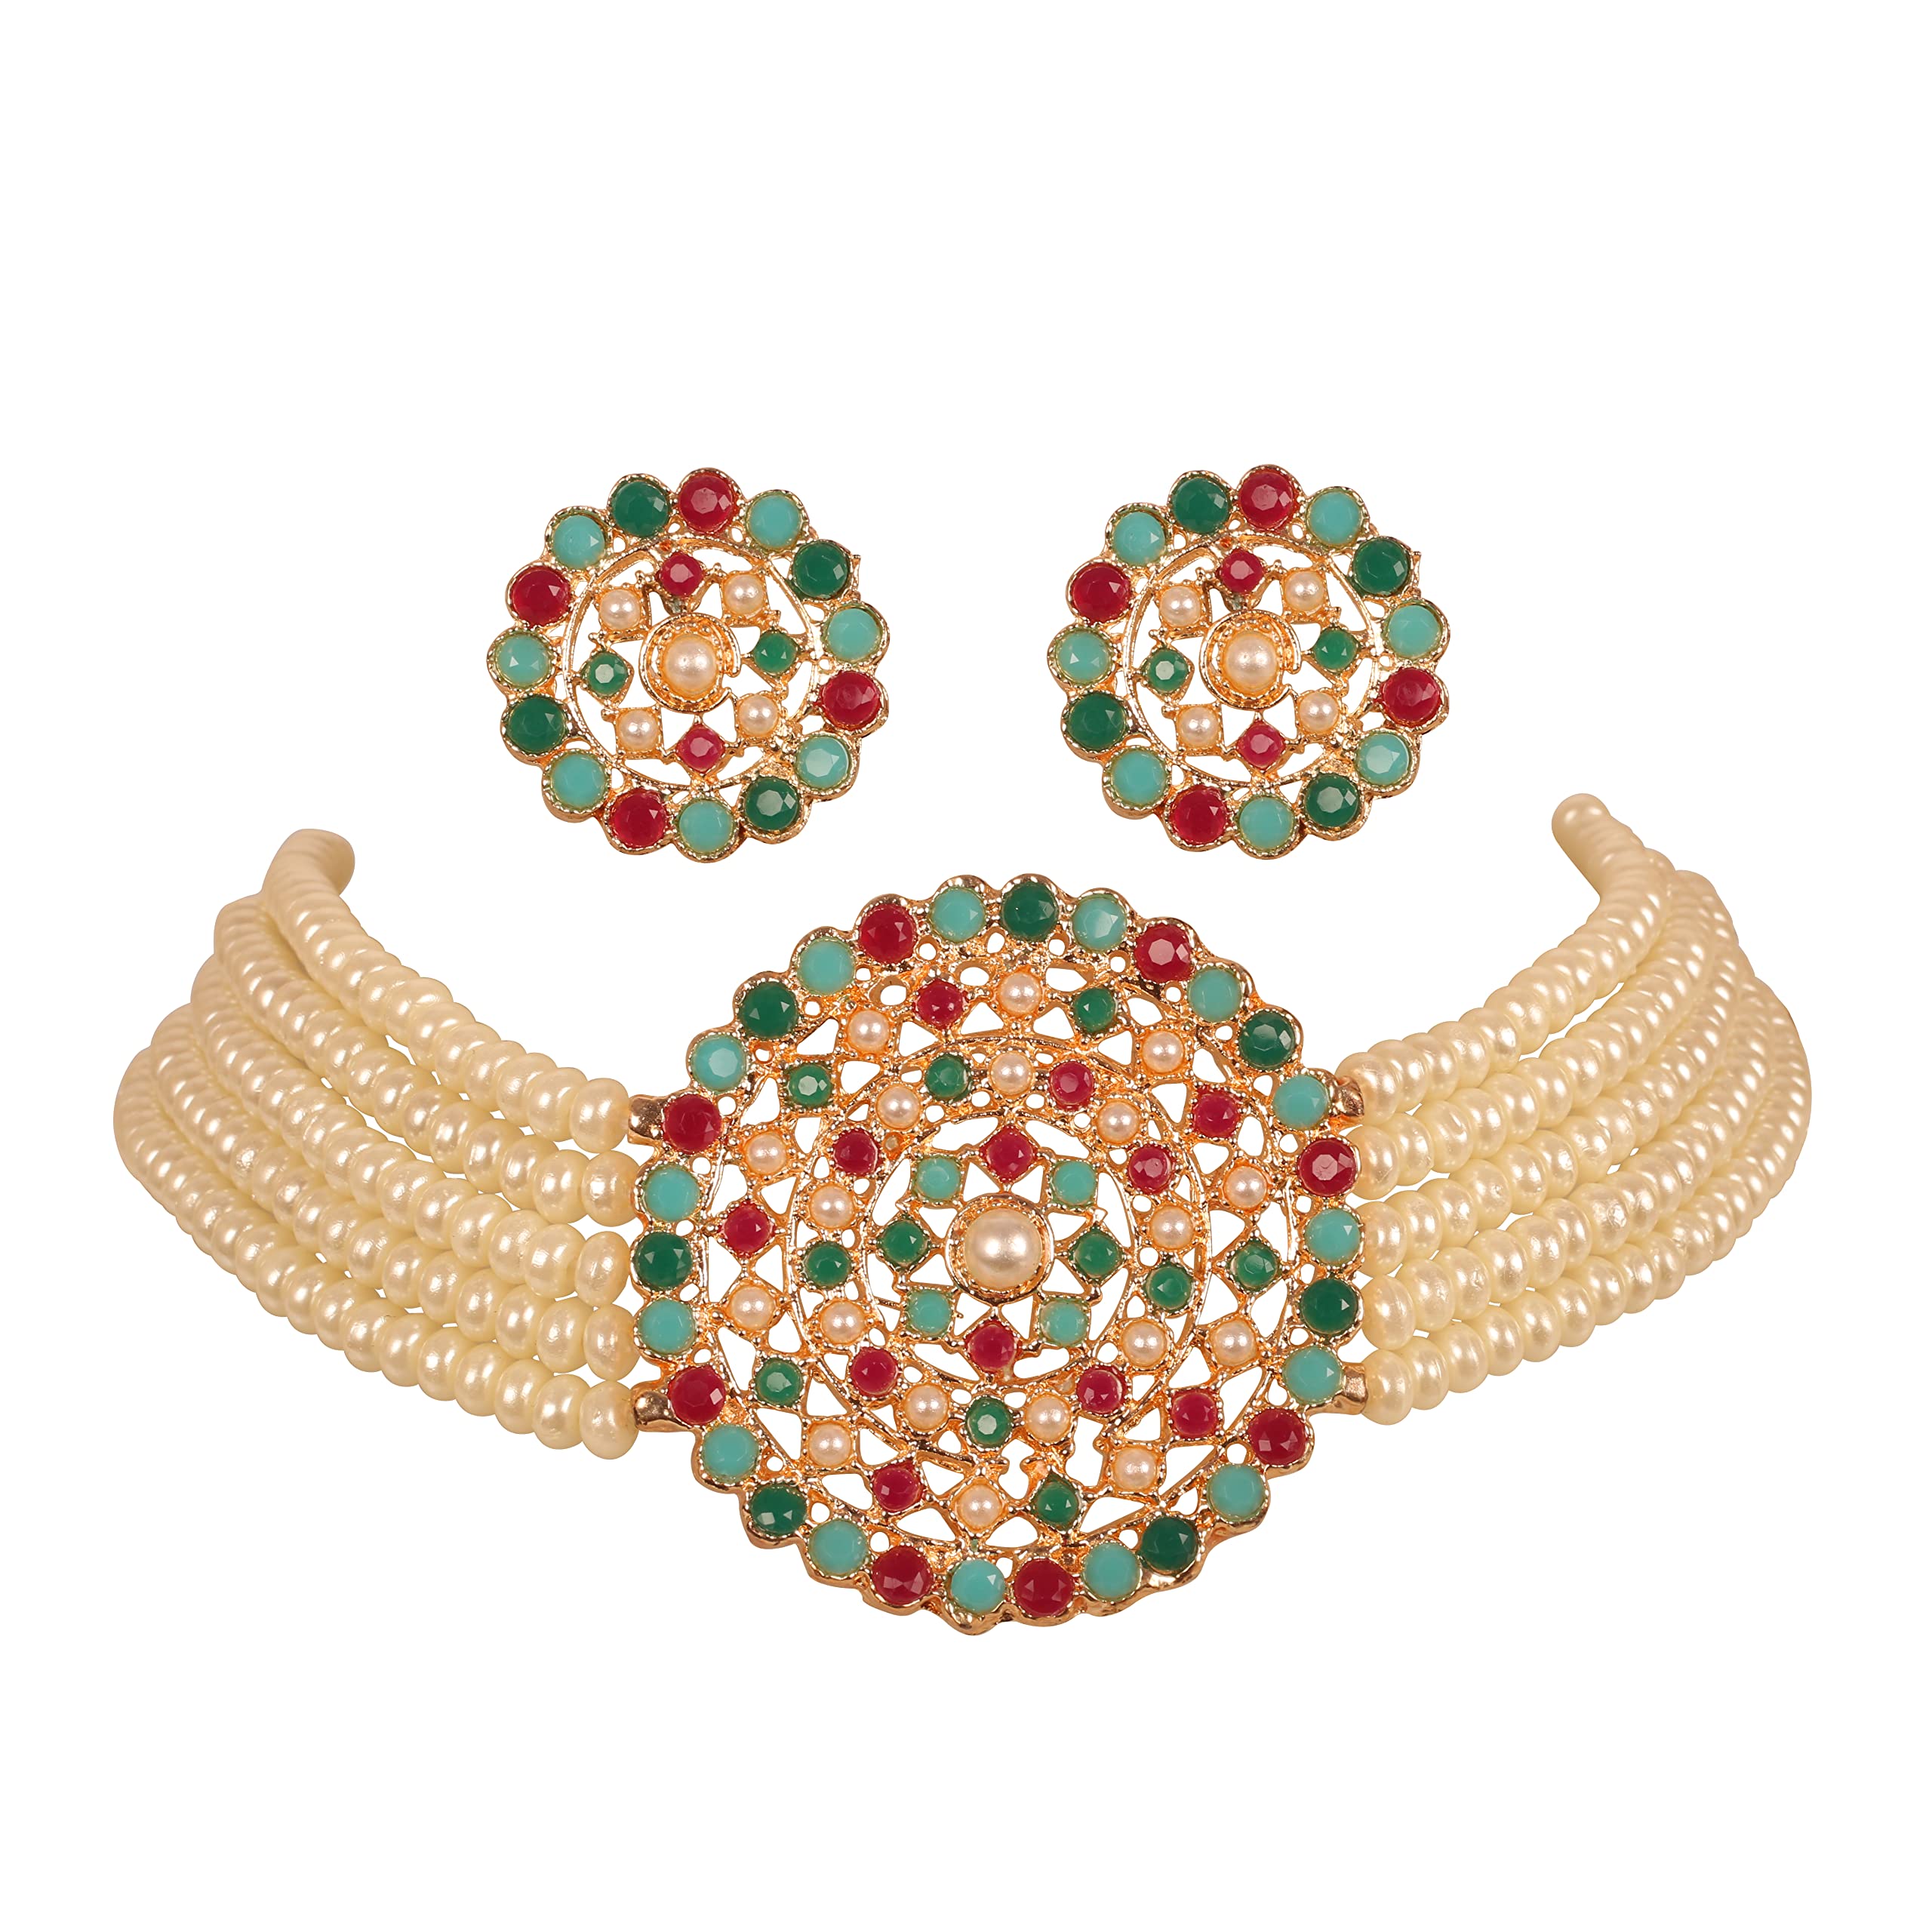 Mughal Jewelry: Antique Royal Jewelry of North India - Bellatory